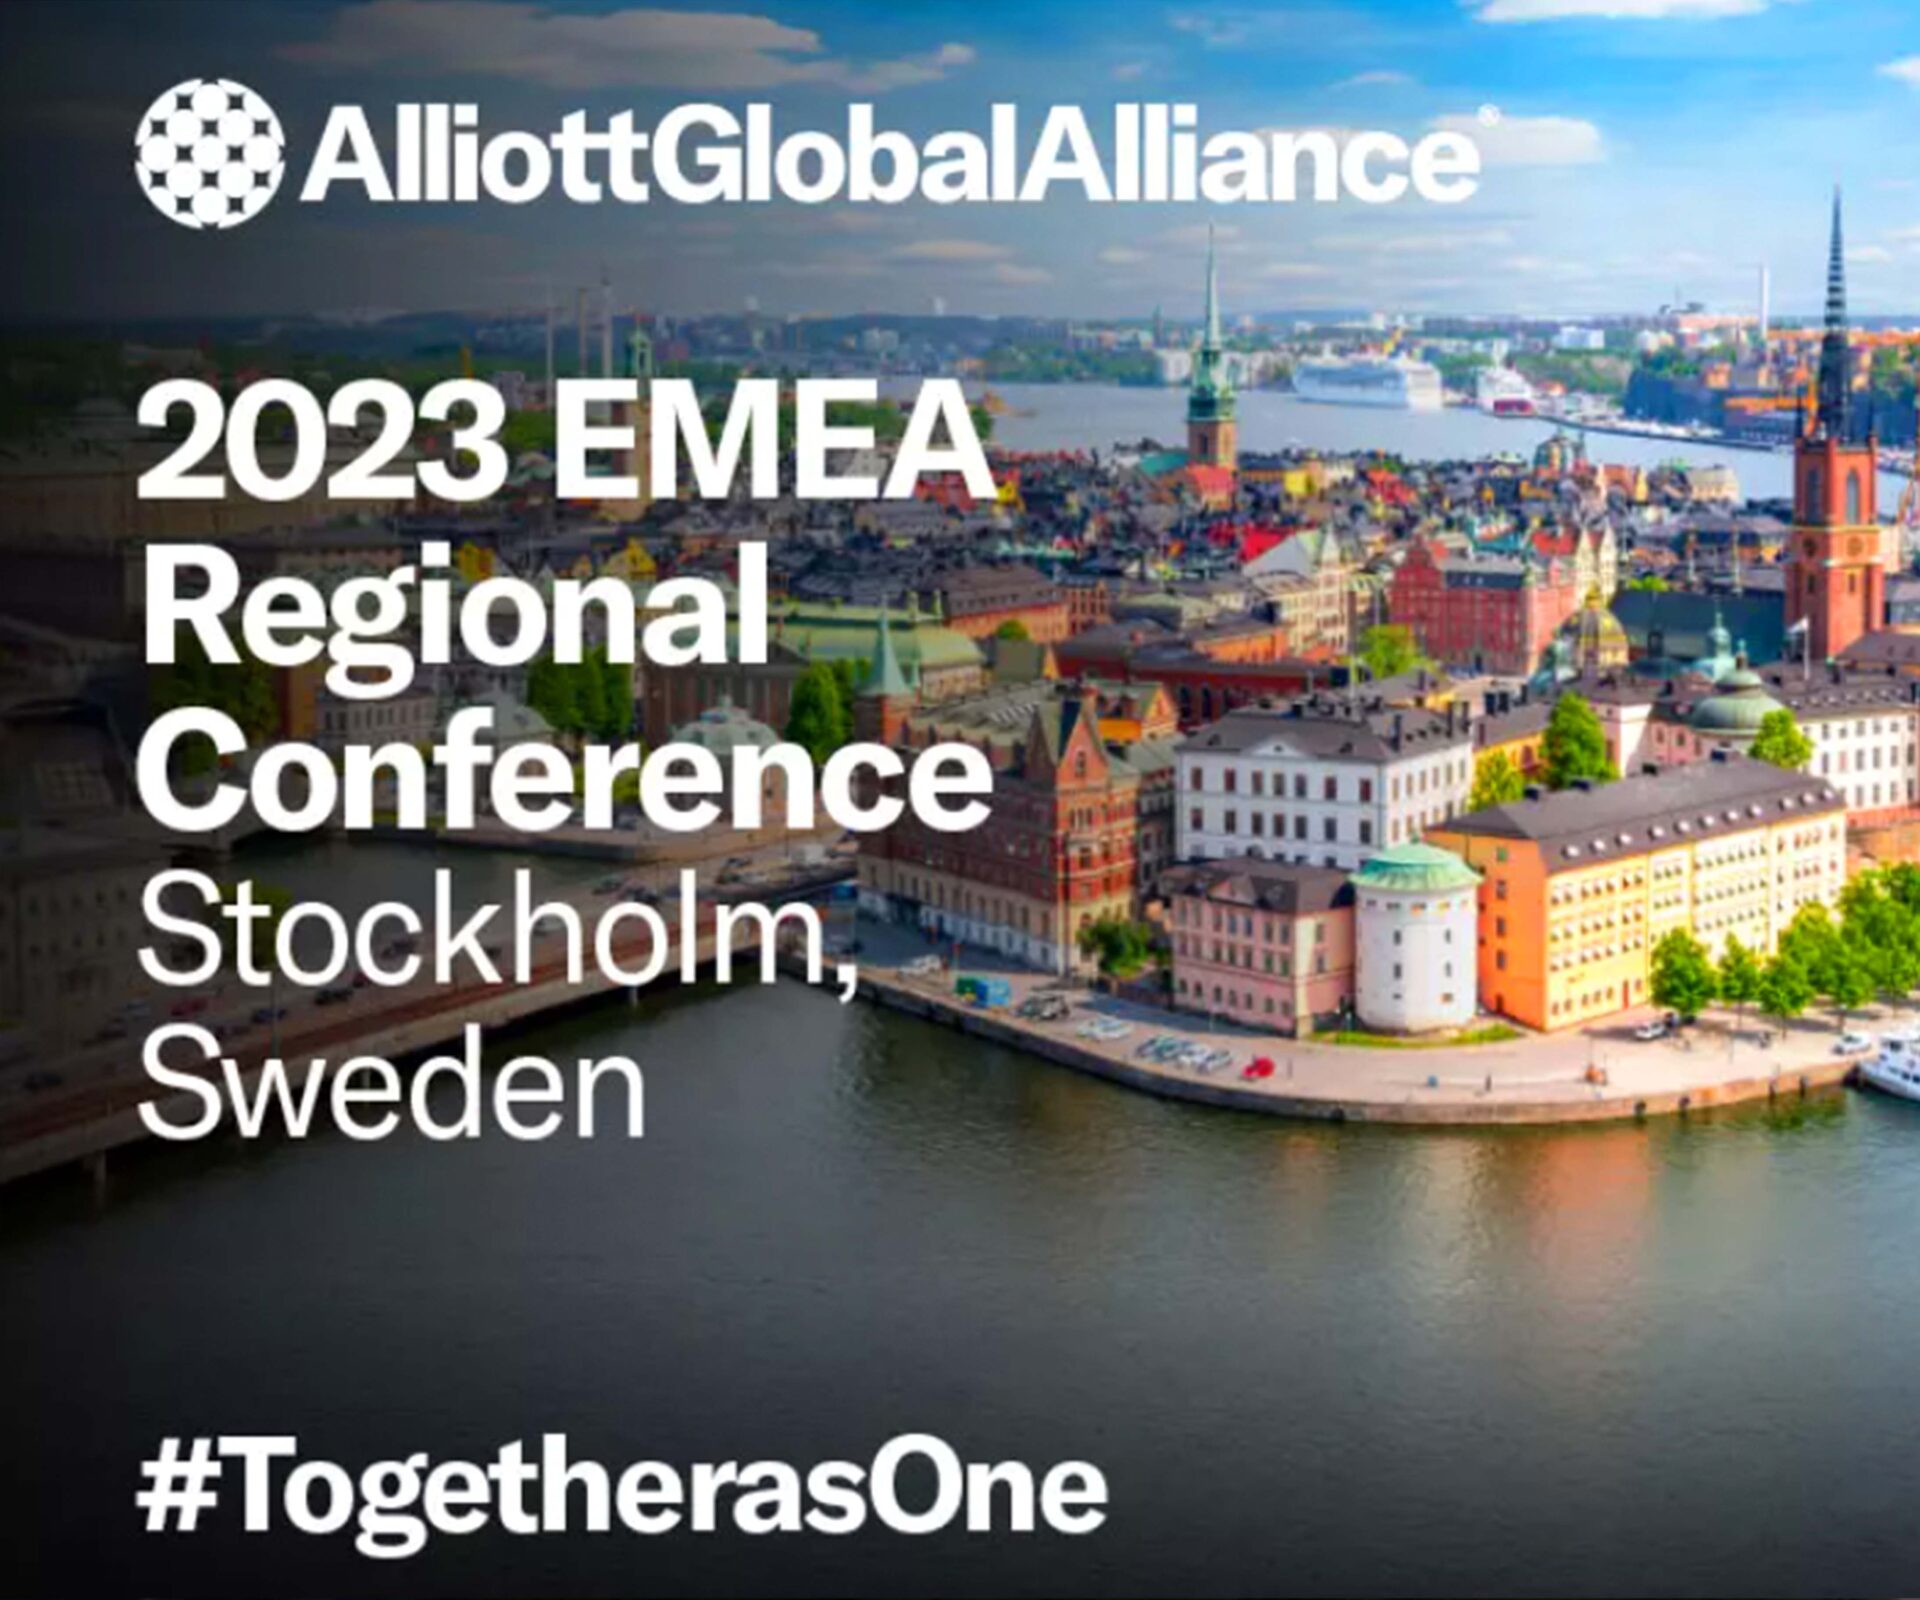 WLAW at the Alliott Global Alliance's EMEA Regional Conference in Stockholm